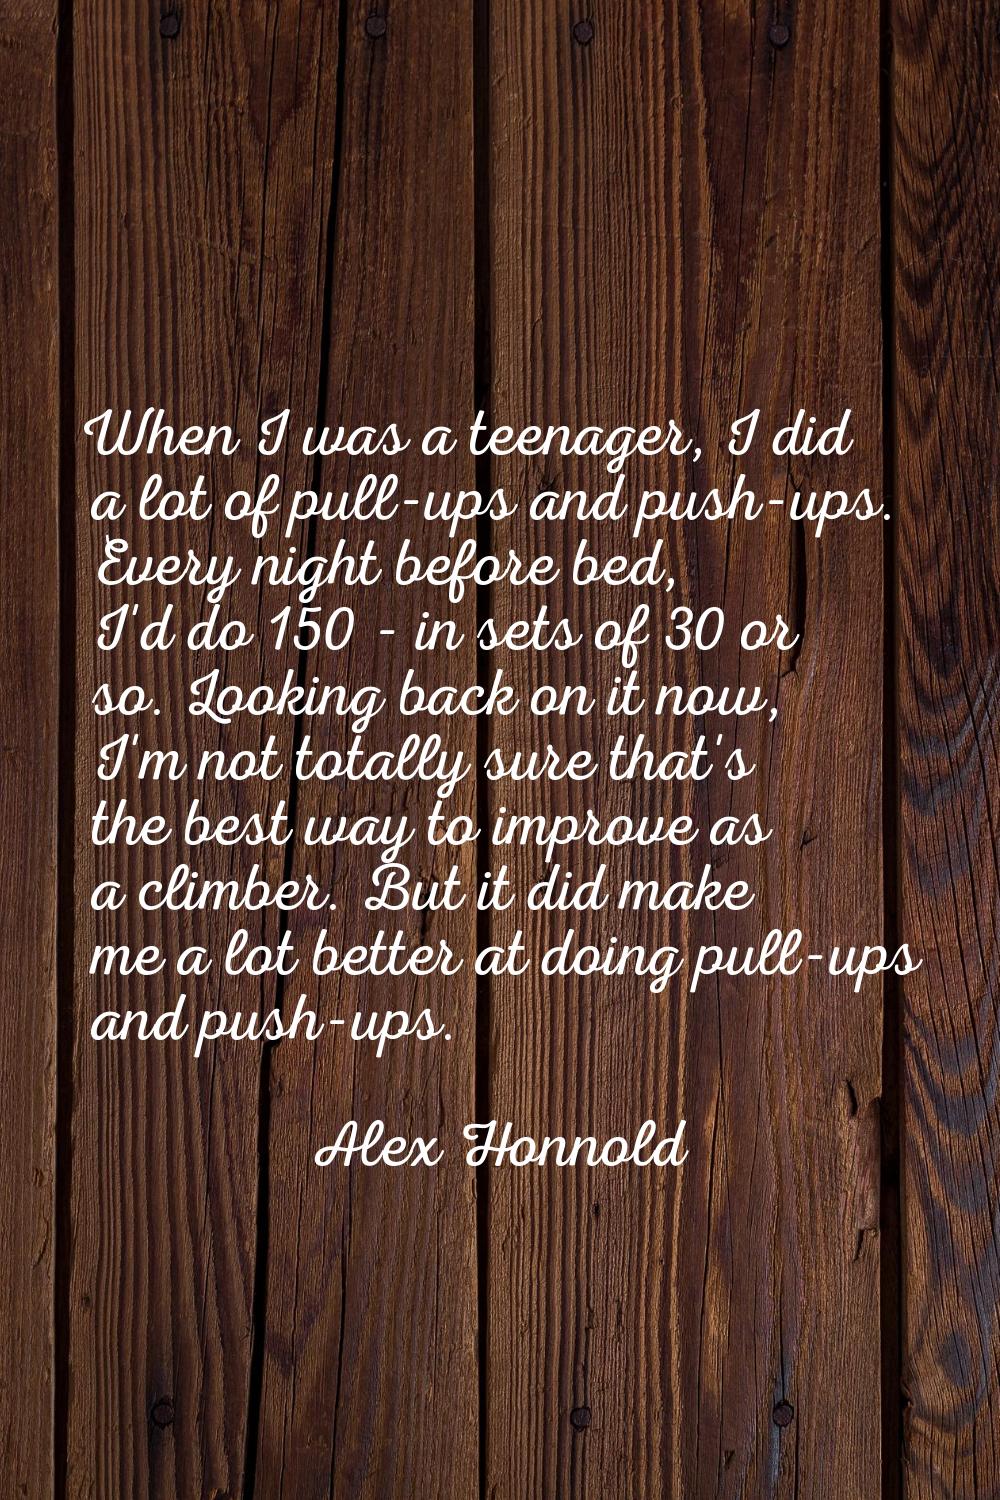 When I was a teenager, I did a lot of pull-ups and push-ups. Every night before bed, I'd do 150 - i